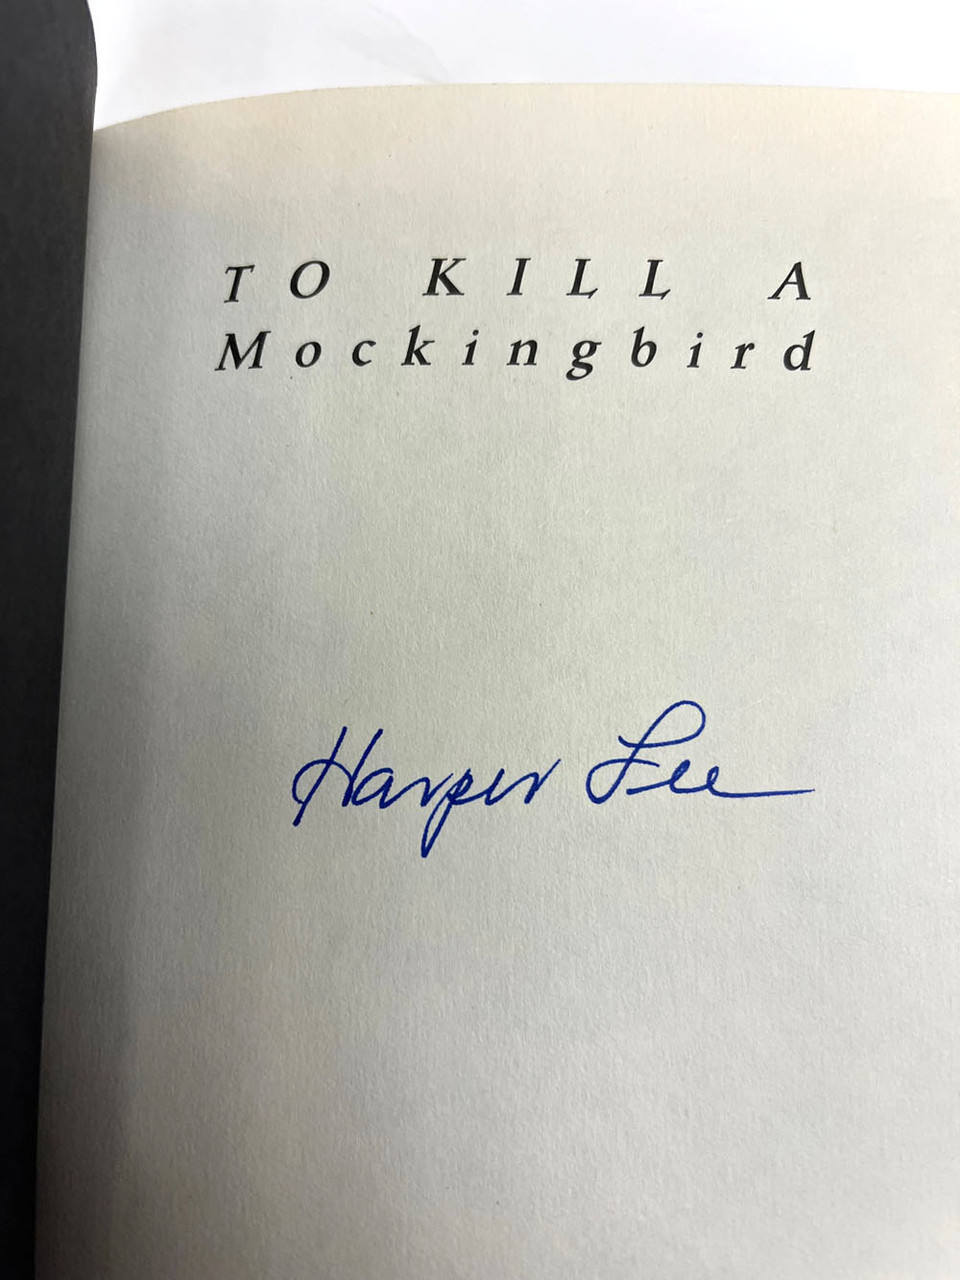 Harper Lee "To Kill A Mockingbird" 35th Anniversary Edition, Signed First Edition/ Later Printing [Fine/Near Fine+]